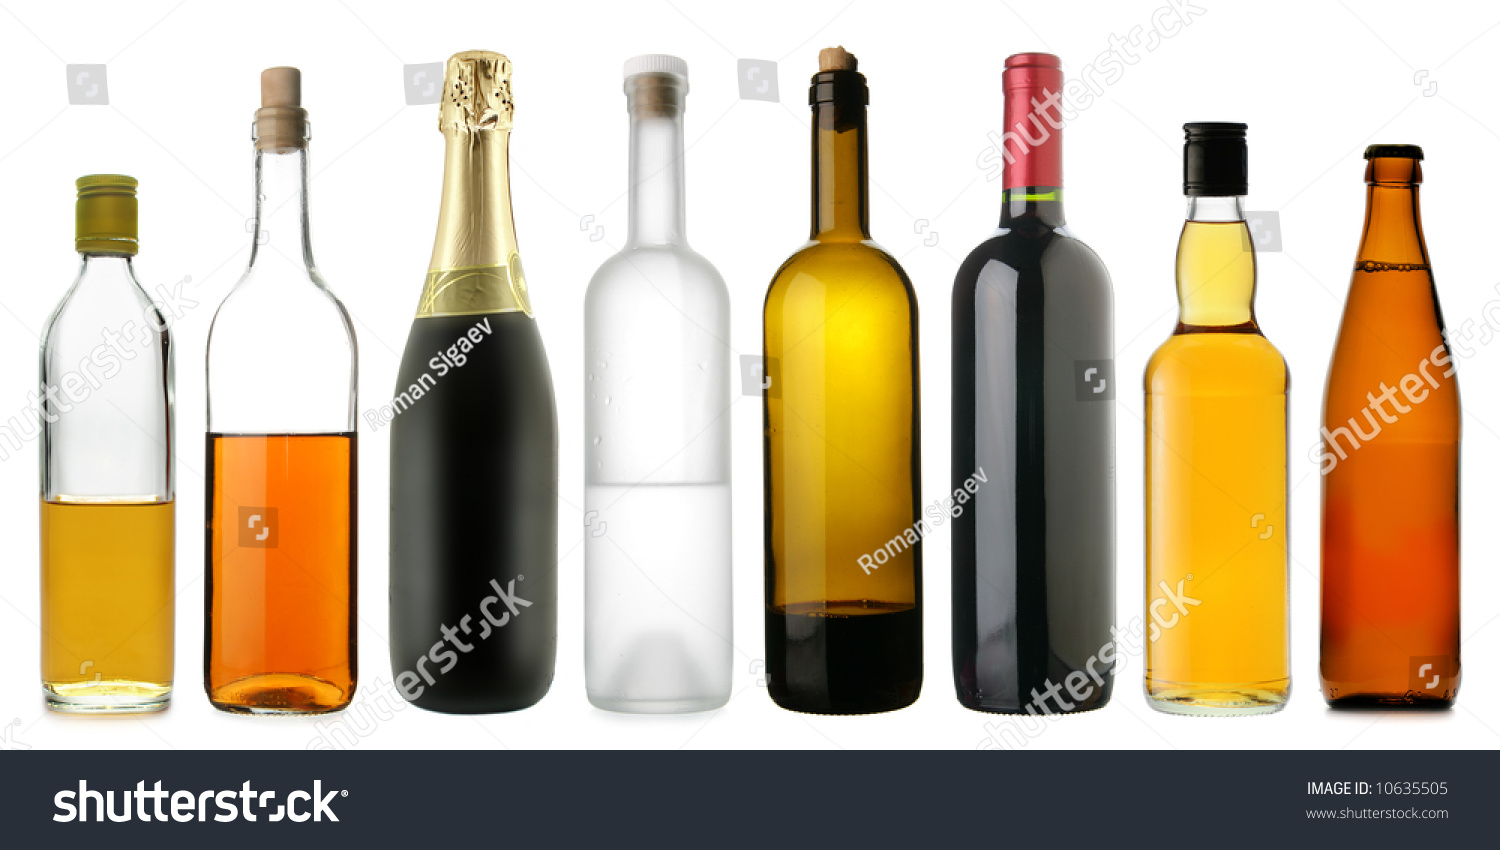 Lots bottles of various alcoholic drinks isolated over white background #10635505